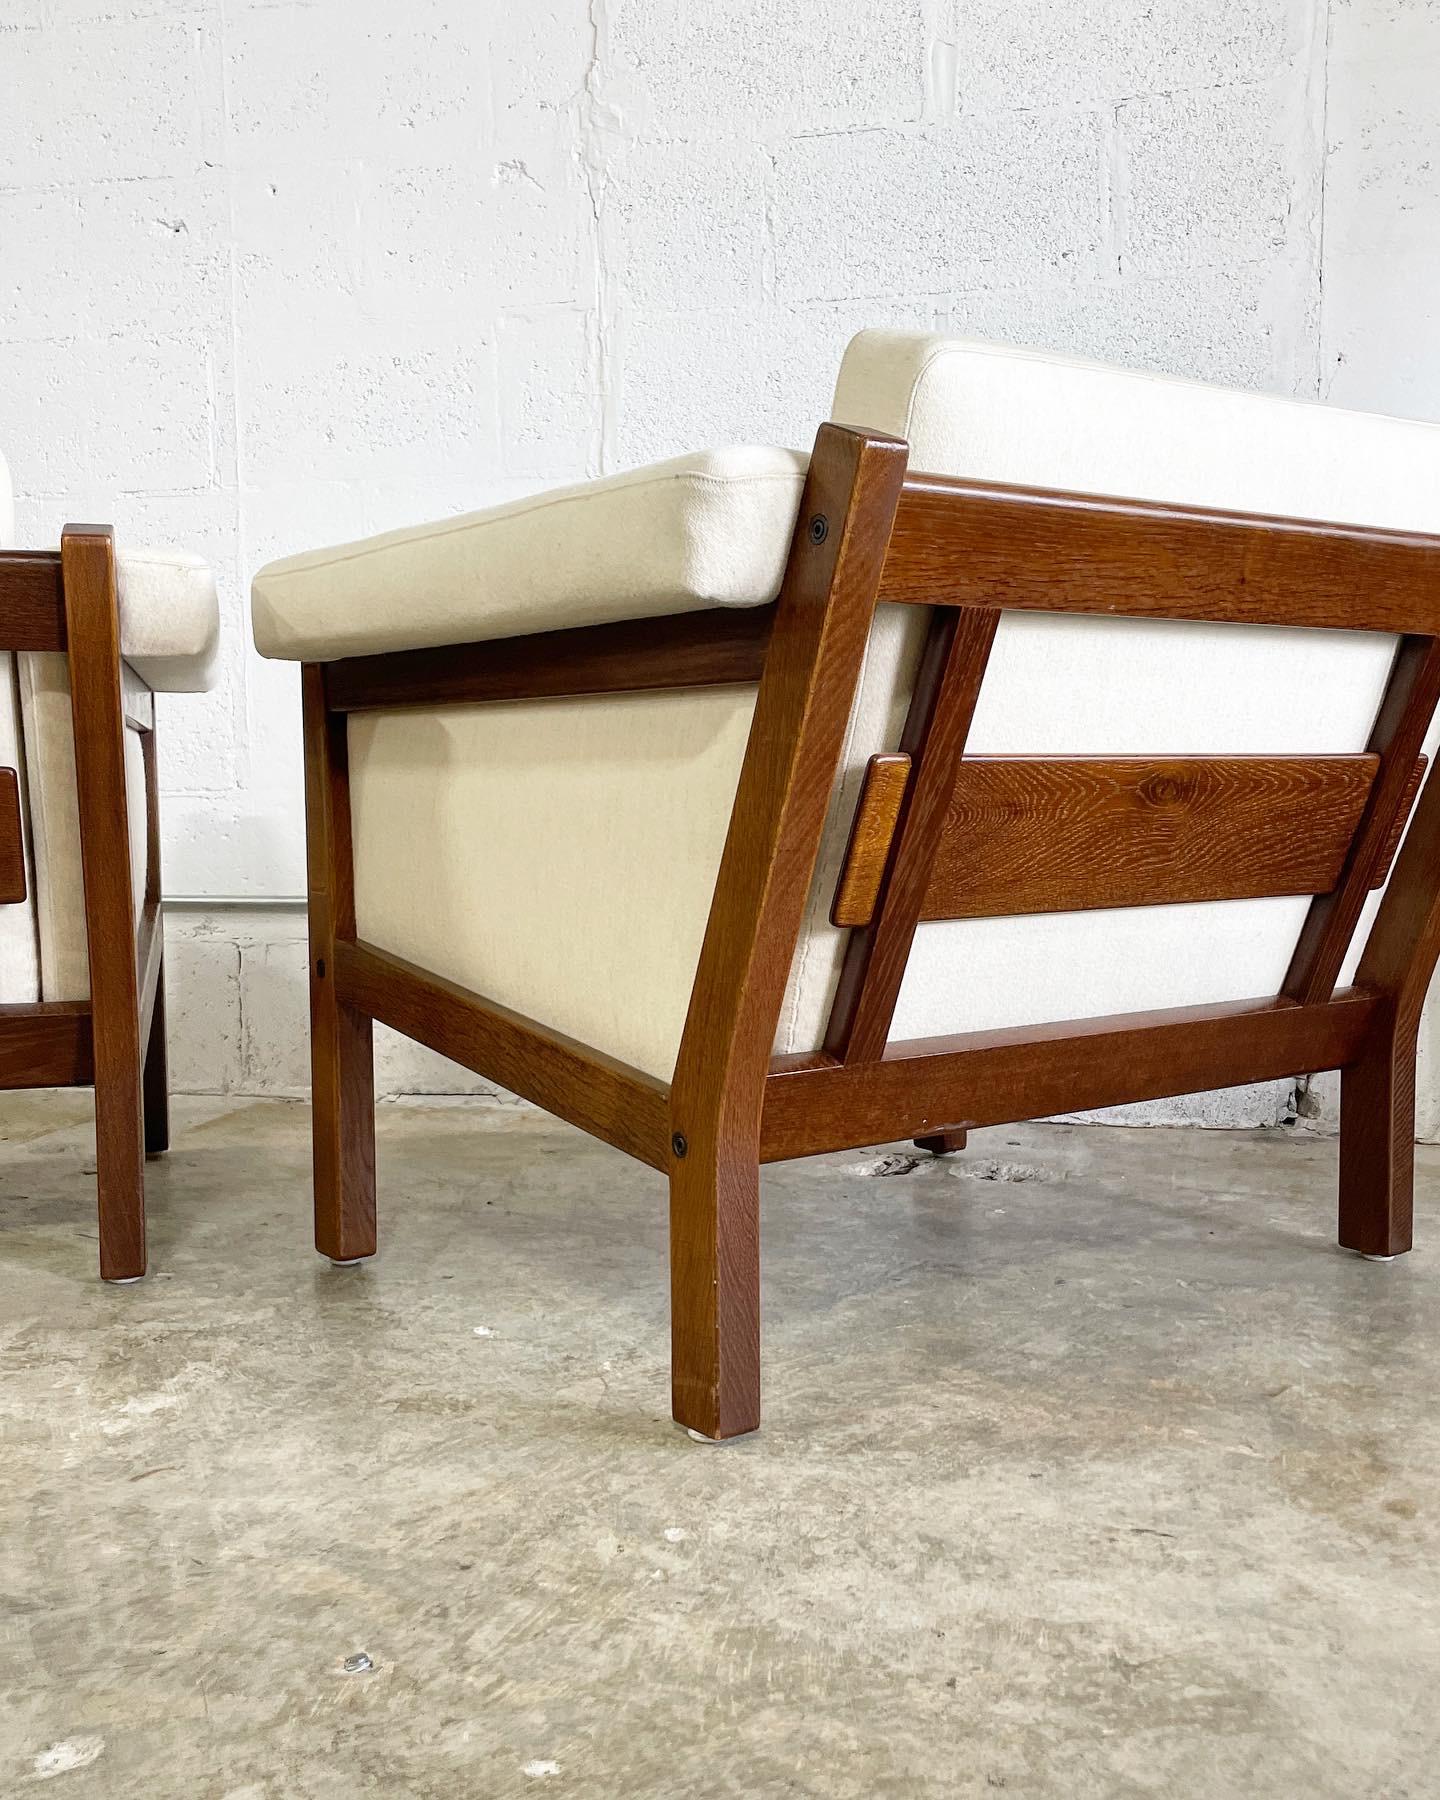 Hans Wegner Ge40 Getama Danish Modern of Lounge Chairs - a Pair In Good Condition For Sale In Fort Lauderdale, FL